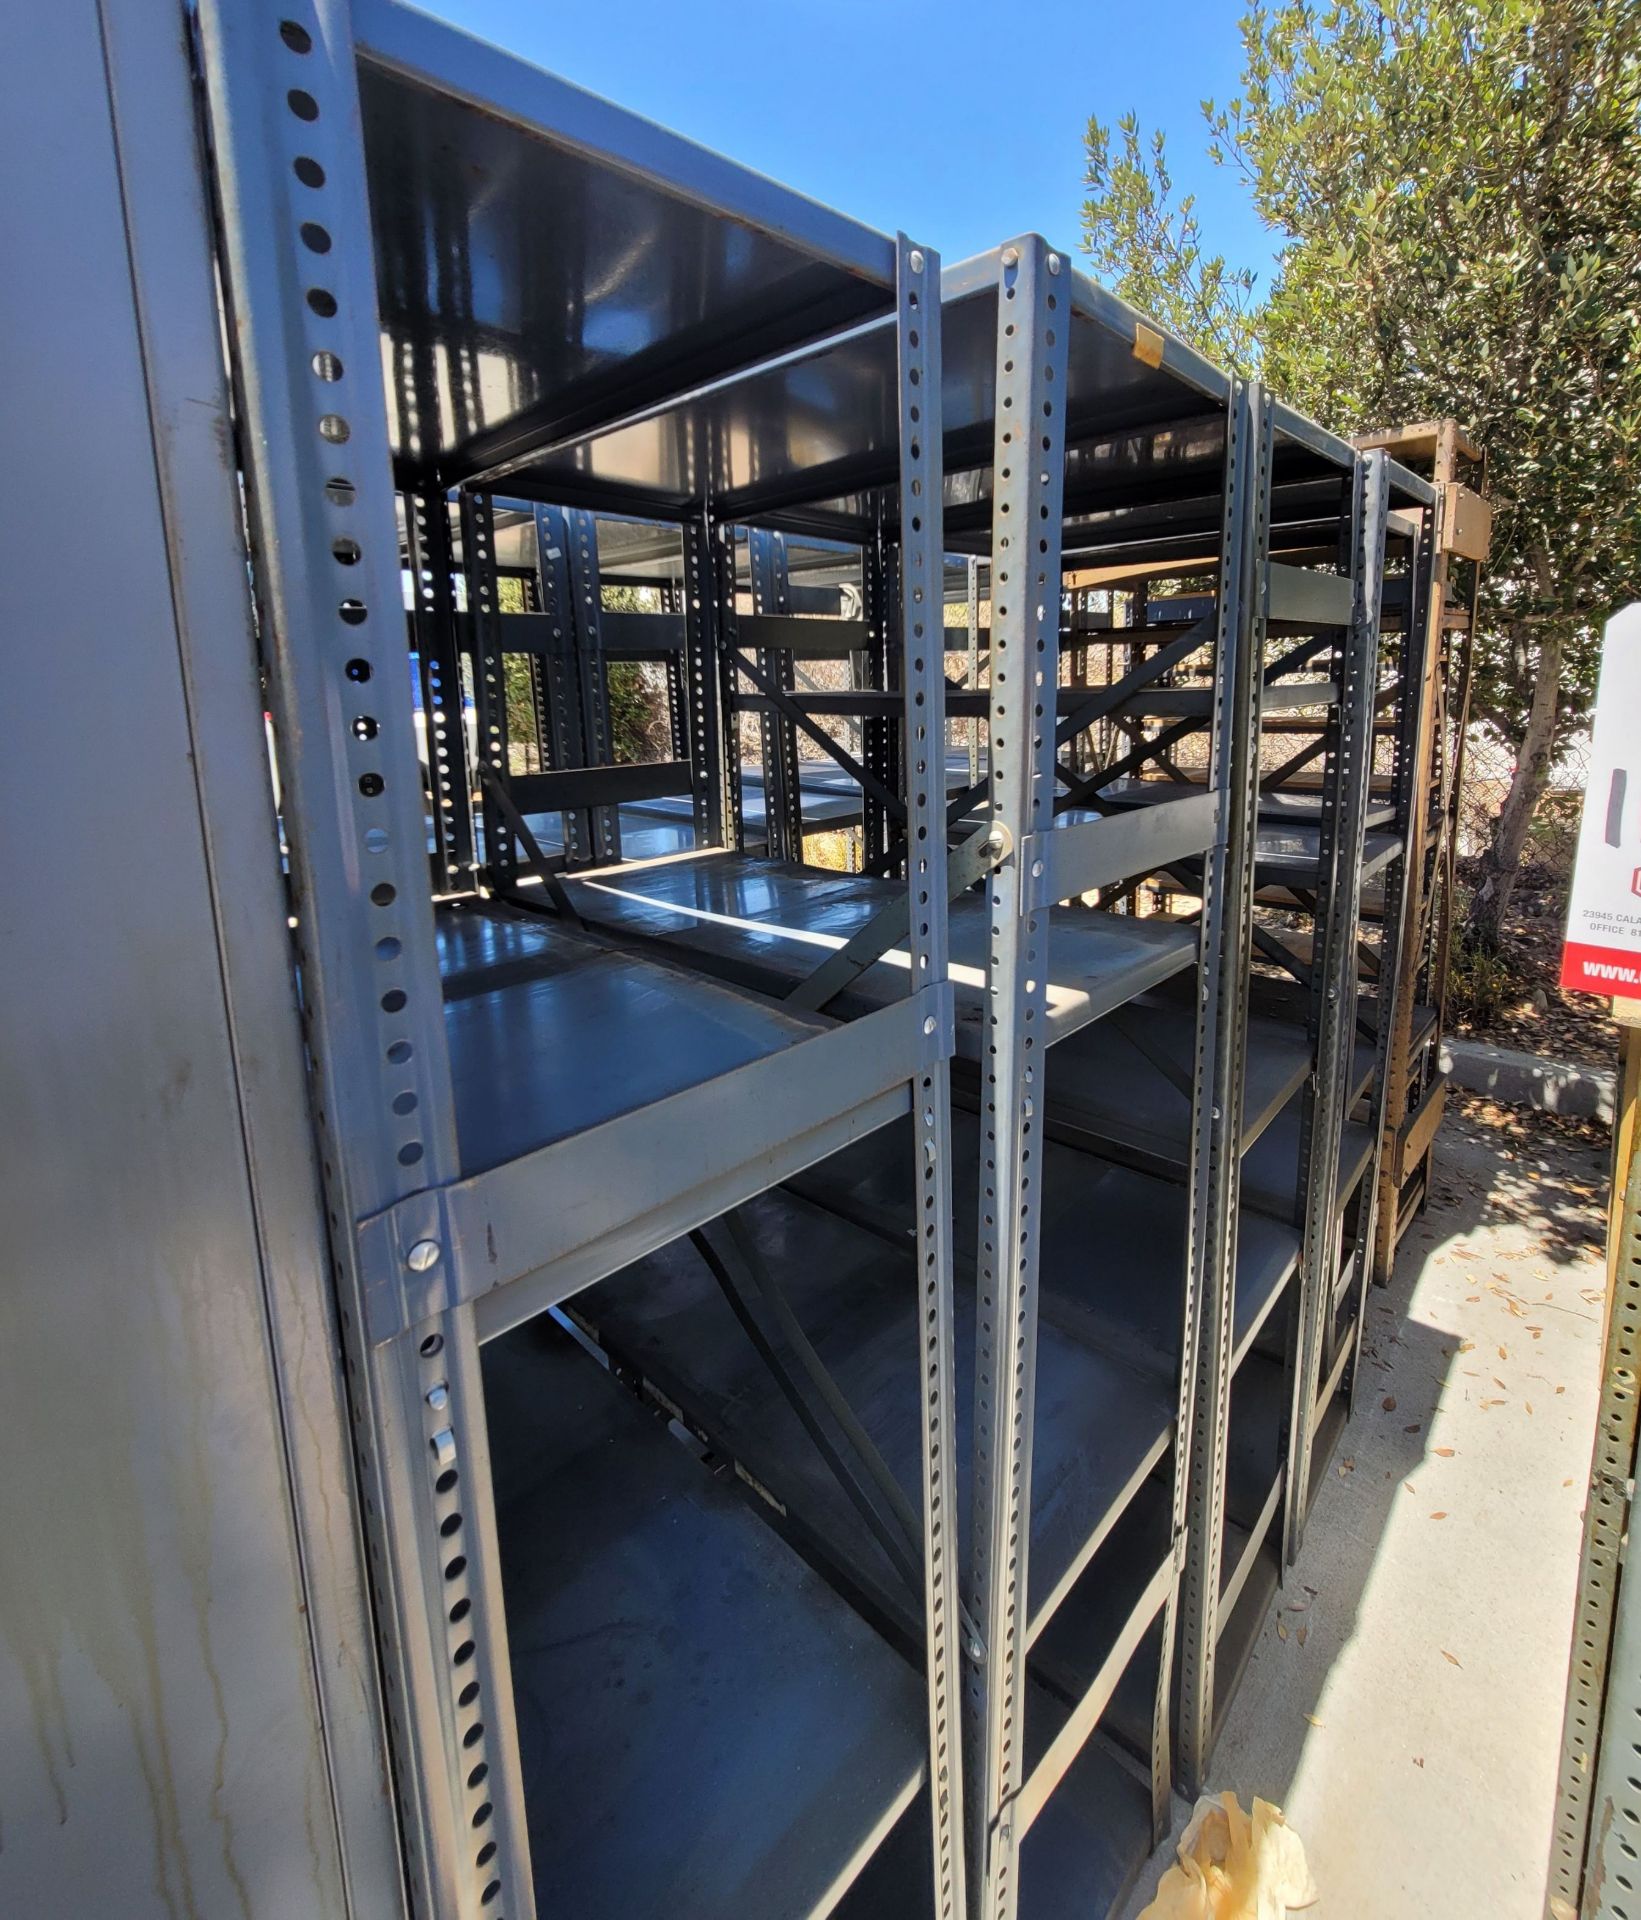 LOT - MISC. STEEL RACKS, STORAGE CABINETS, FILE CABINETS - Image 3 of 3